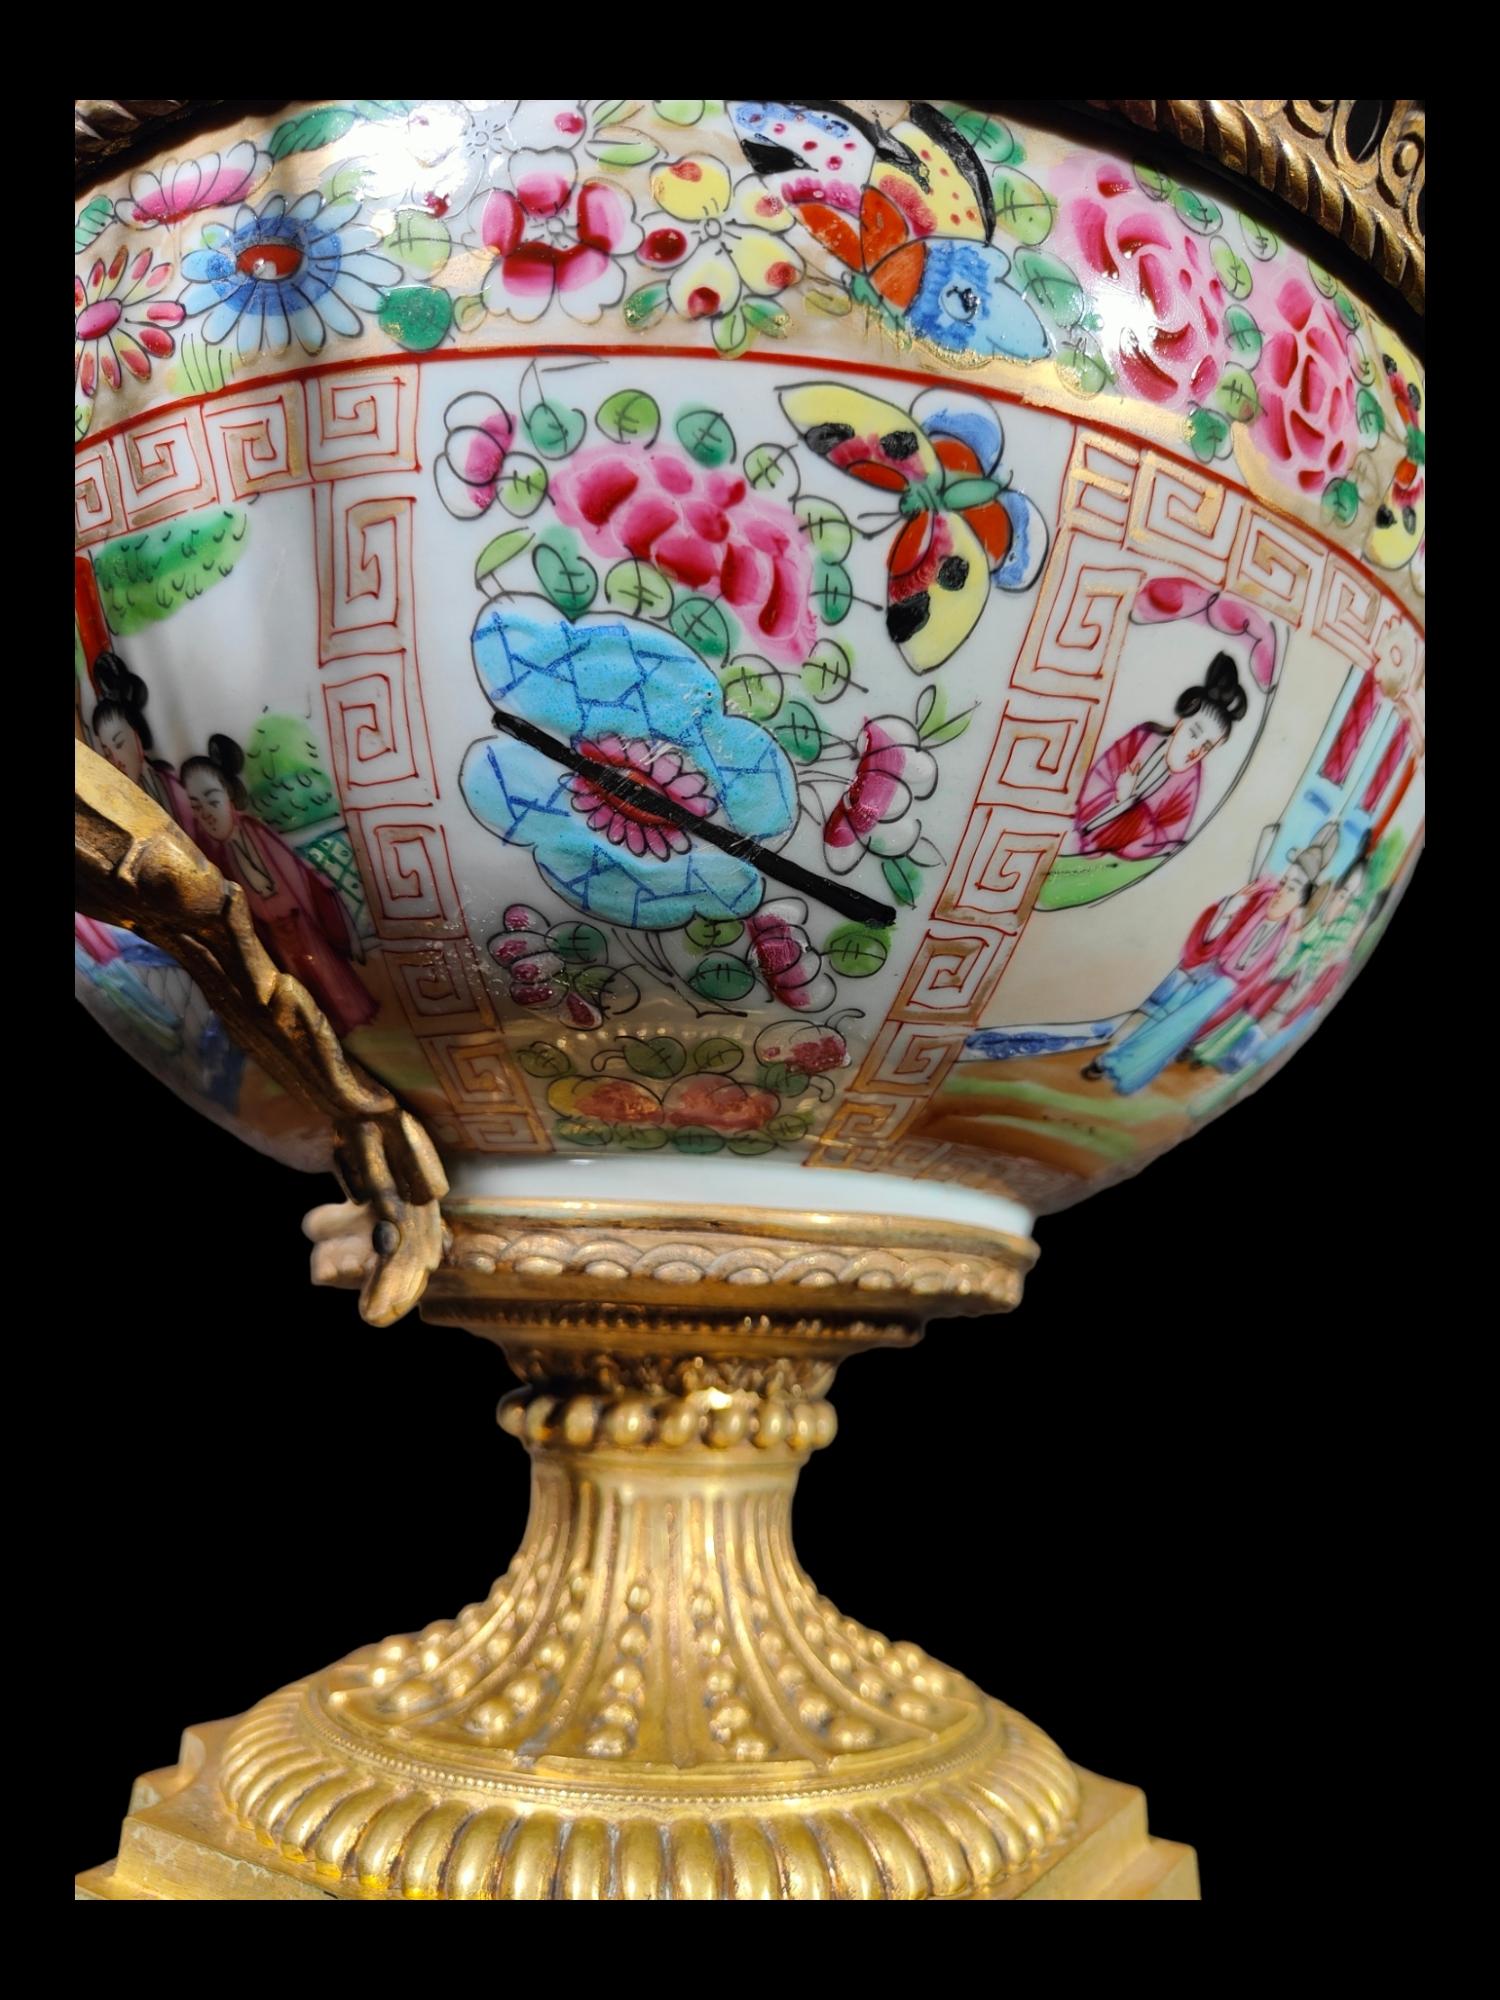 Chinese porcelain punch bowl 19th century
Large Chinese porcelain bowl for export, mounted in golden bronze from the 19th century. The porcelain is in excellent condition without breaks or faults. Measures: 42x34x32 cm.